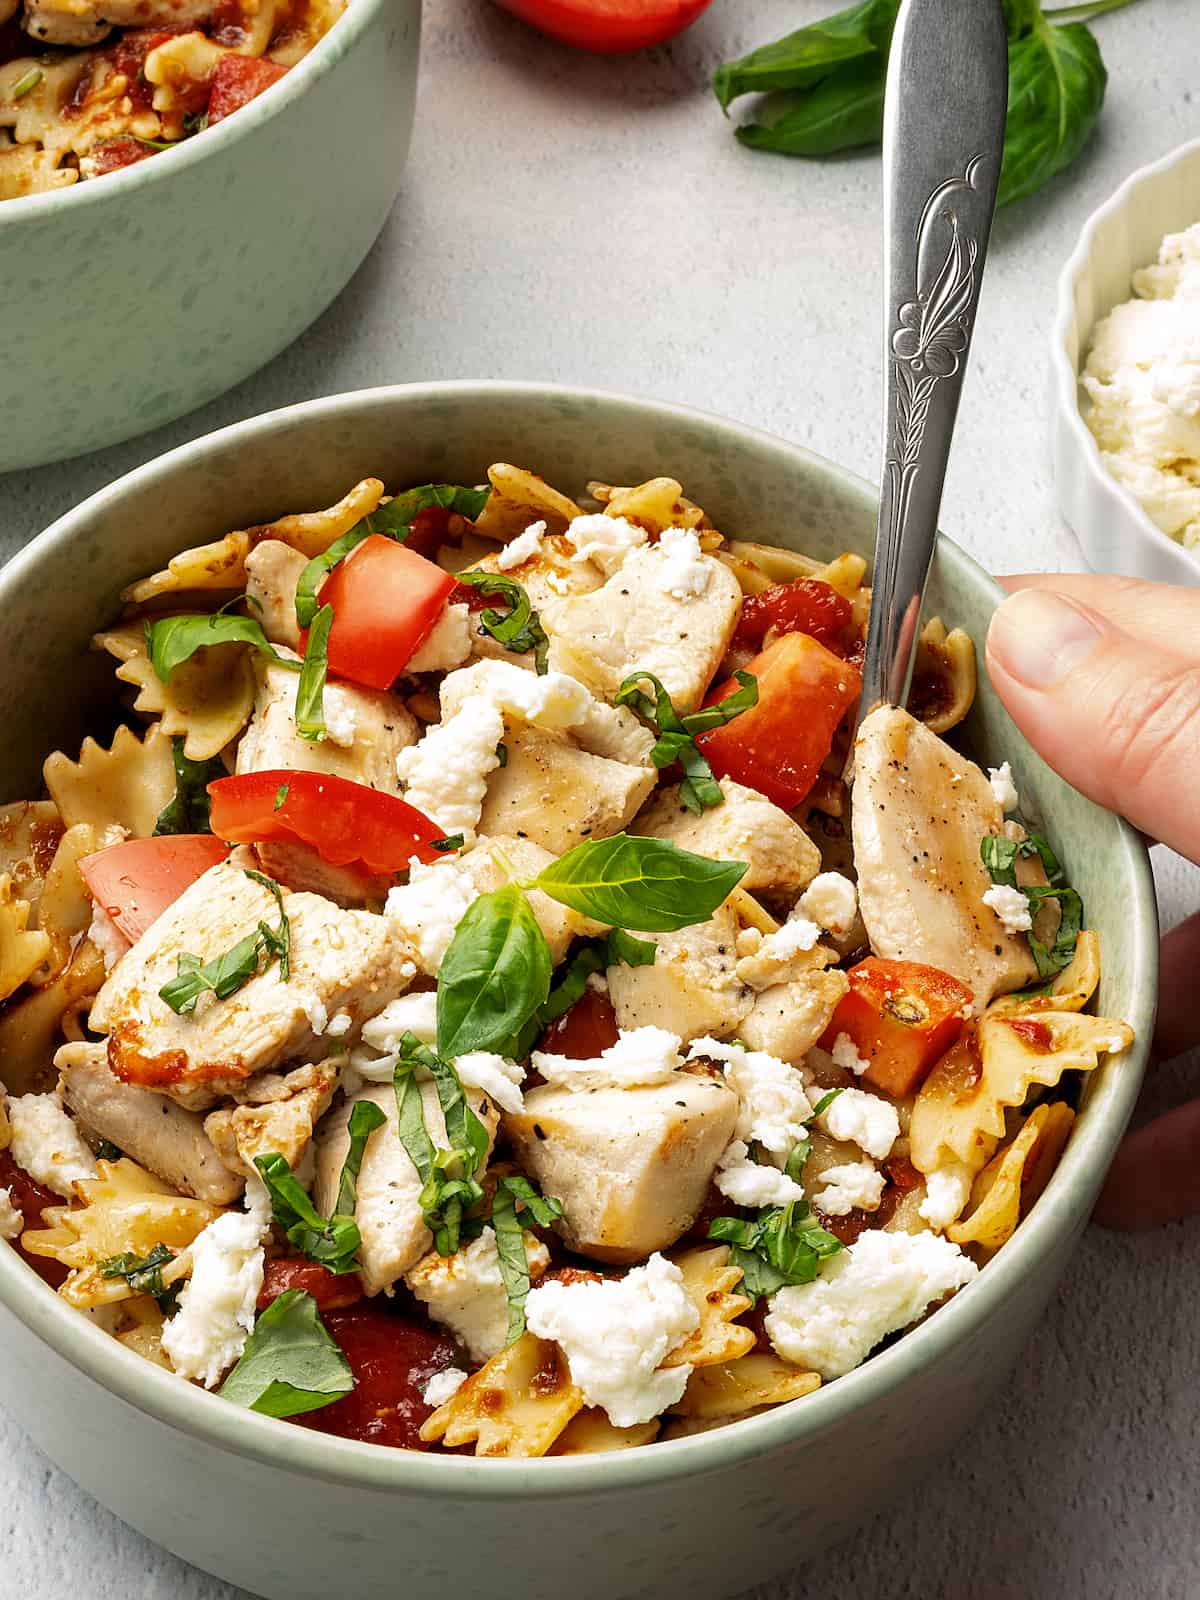 Chicken, diced tomato, chopped basil and bowtie noodles in a bowl with a spoon.